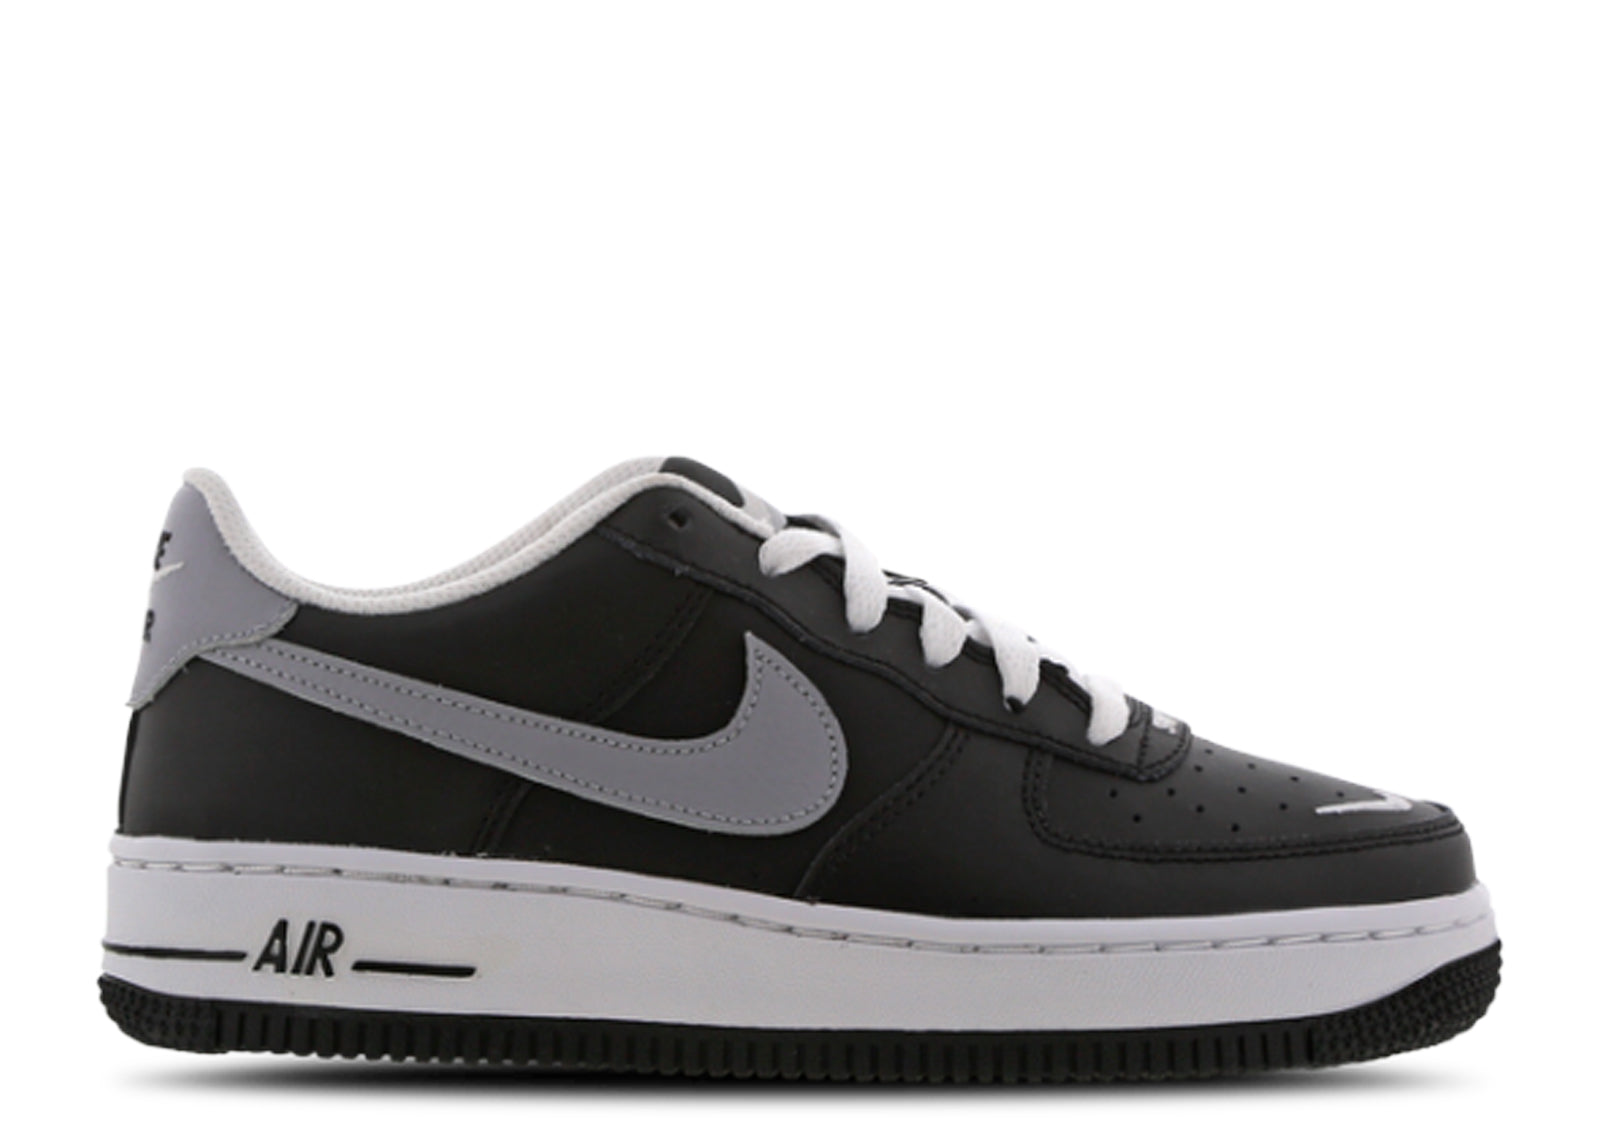 Second Chance - Club Nike Air Force 1 Black Sport GS - 37,5 | NEW